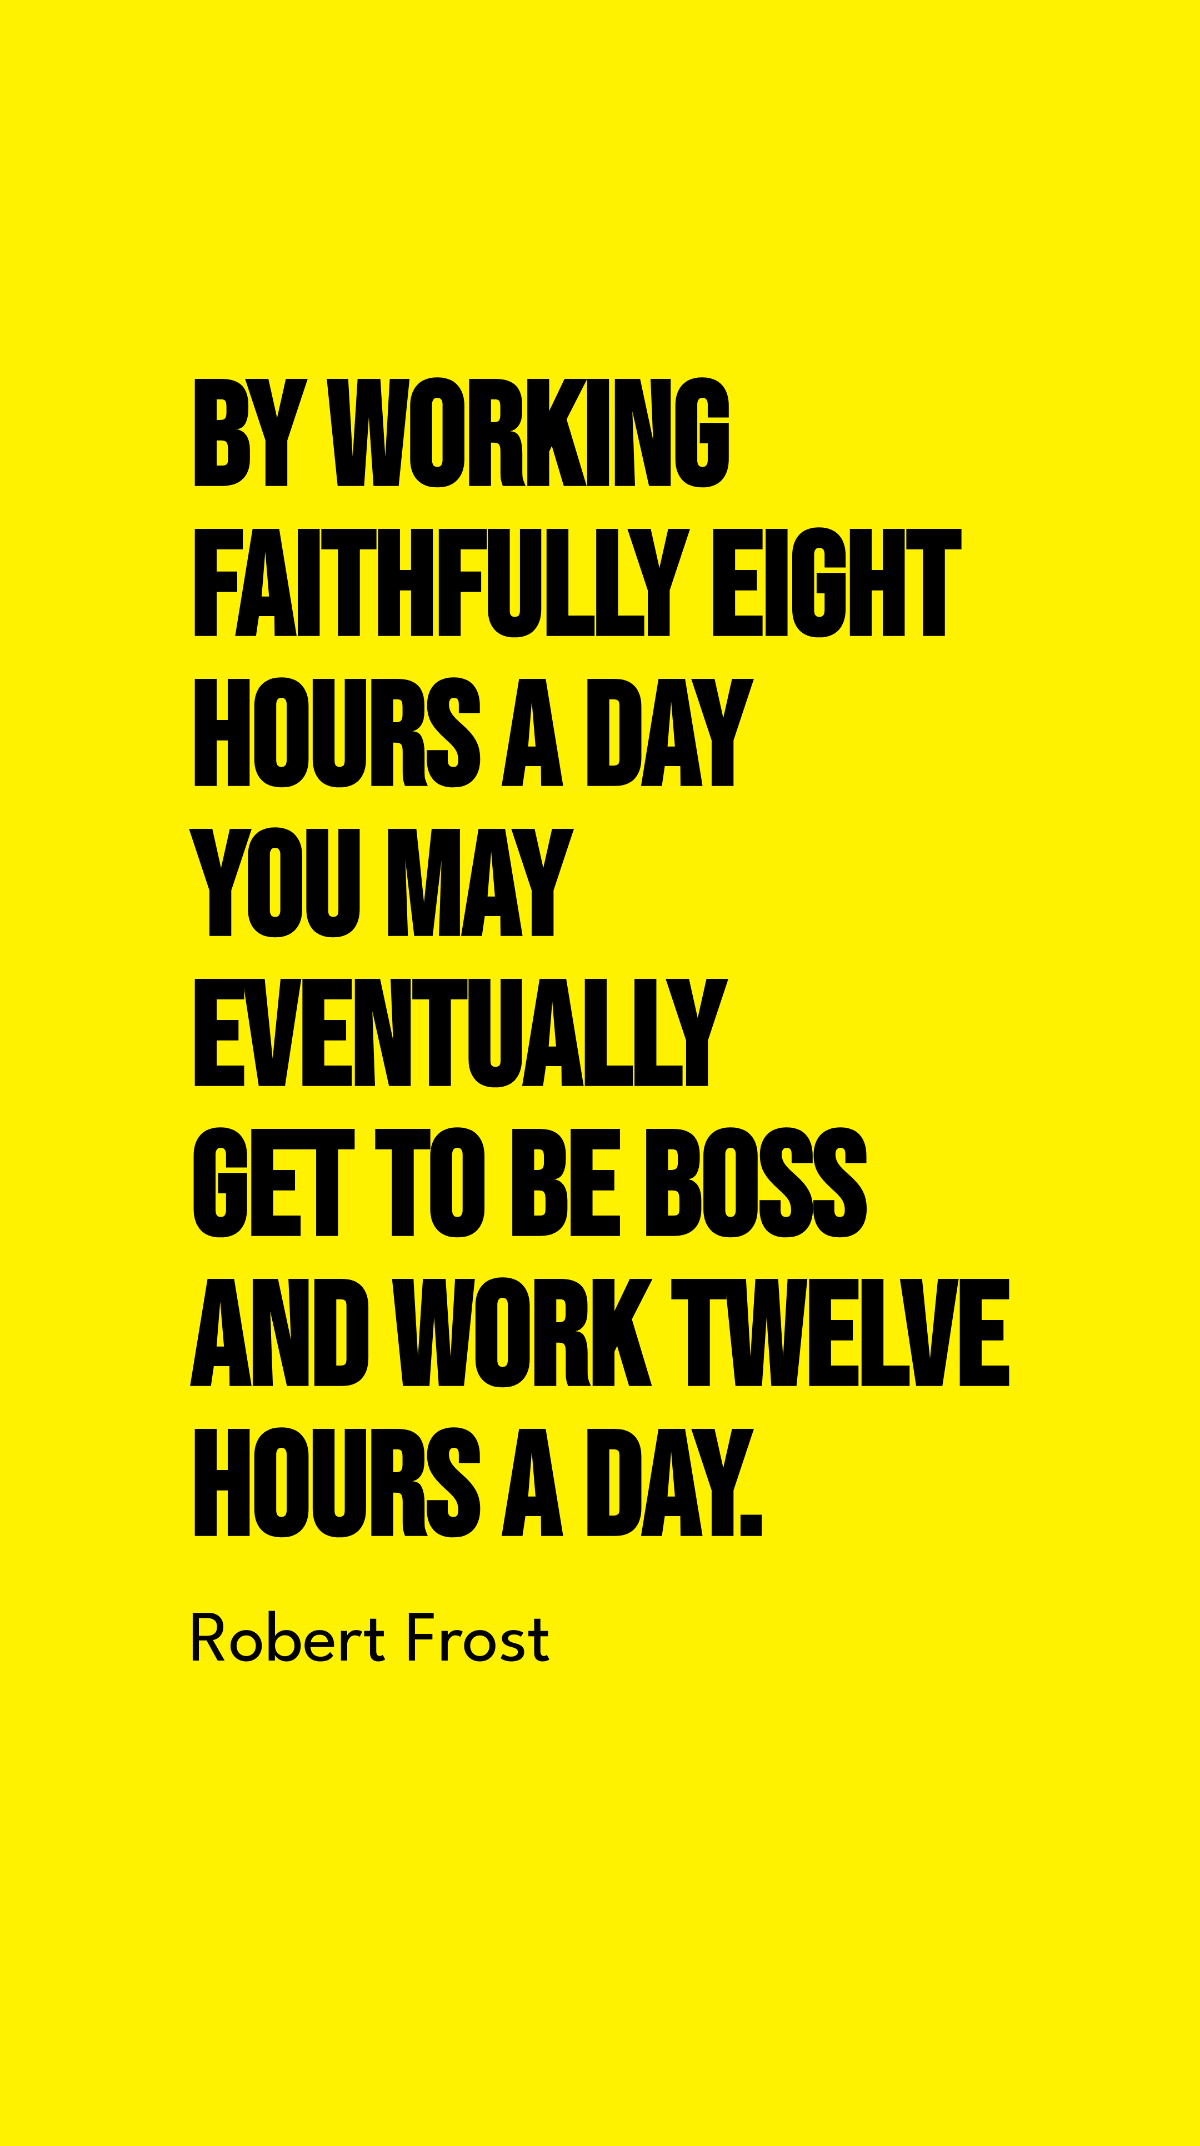 Free Robert Frost - By working faithfully eight hours a day you may eventually get to be boss and work twelve hours a day.  Template